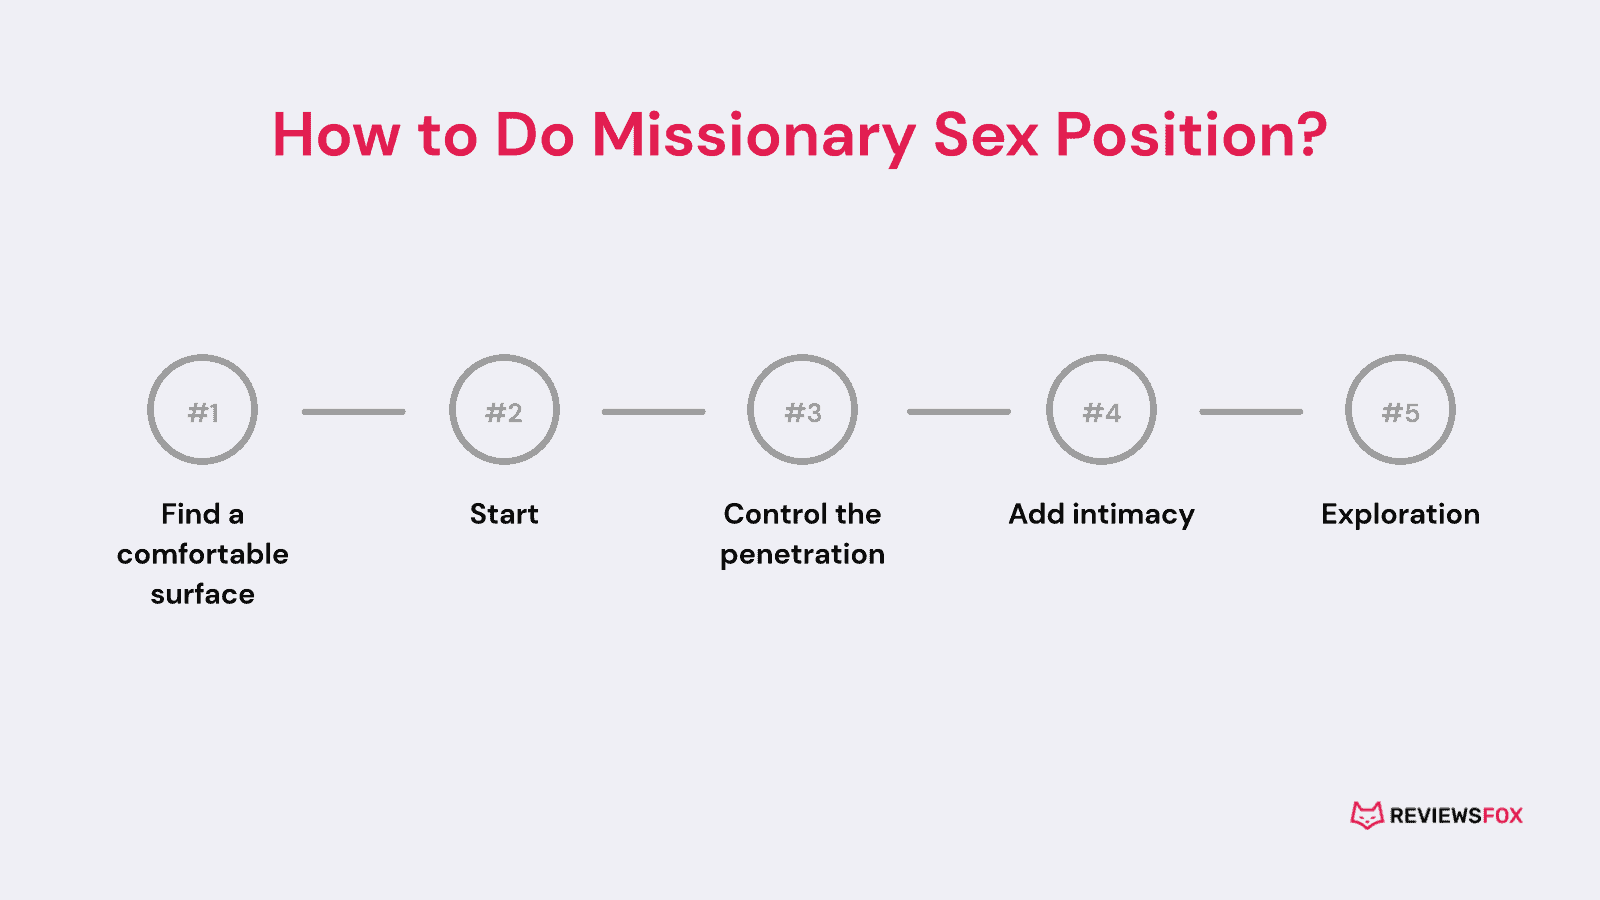 How to do Missionary sex position